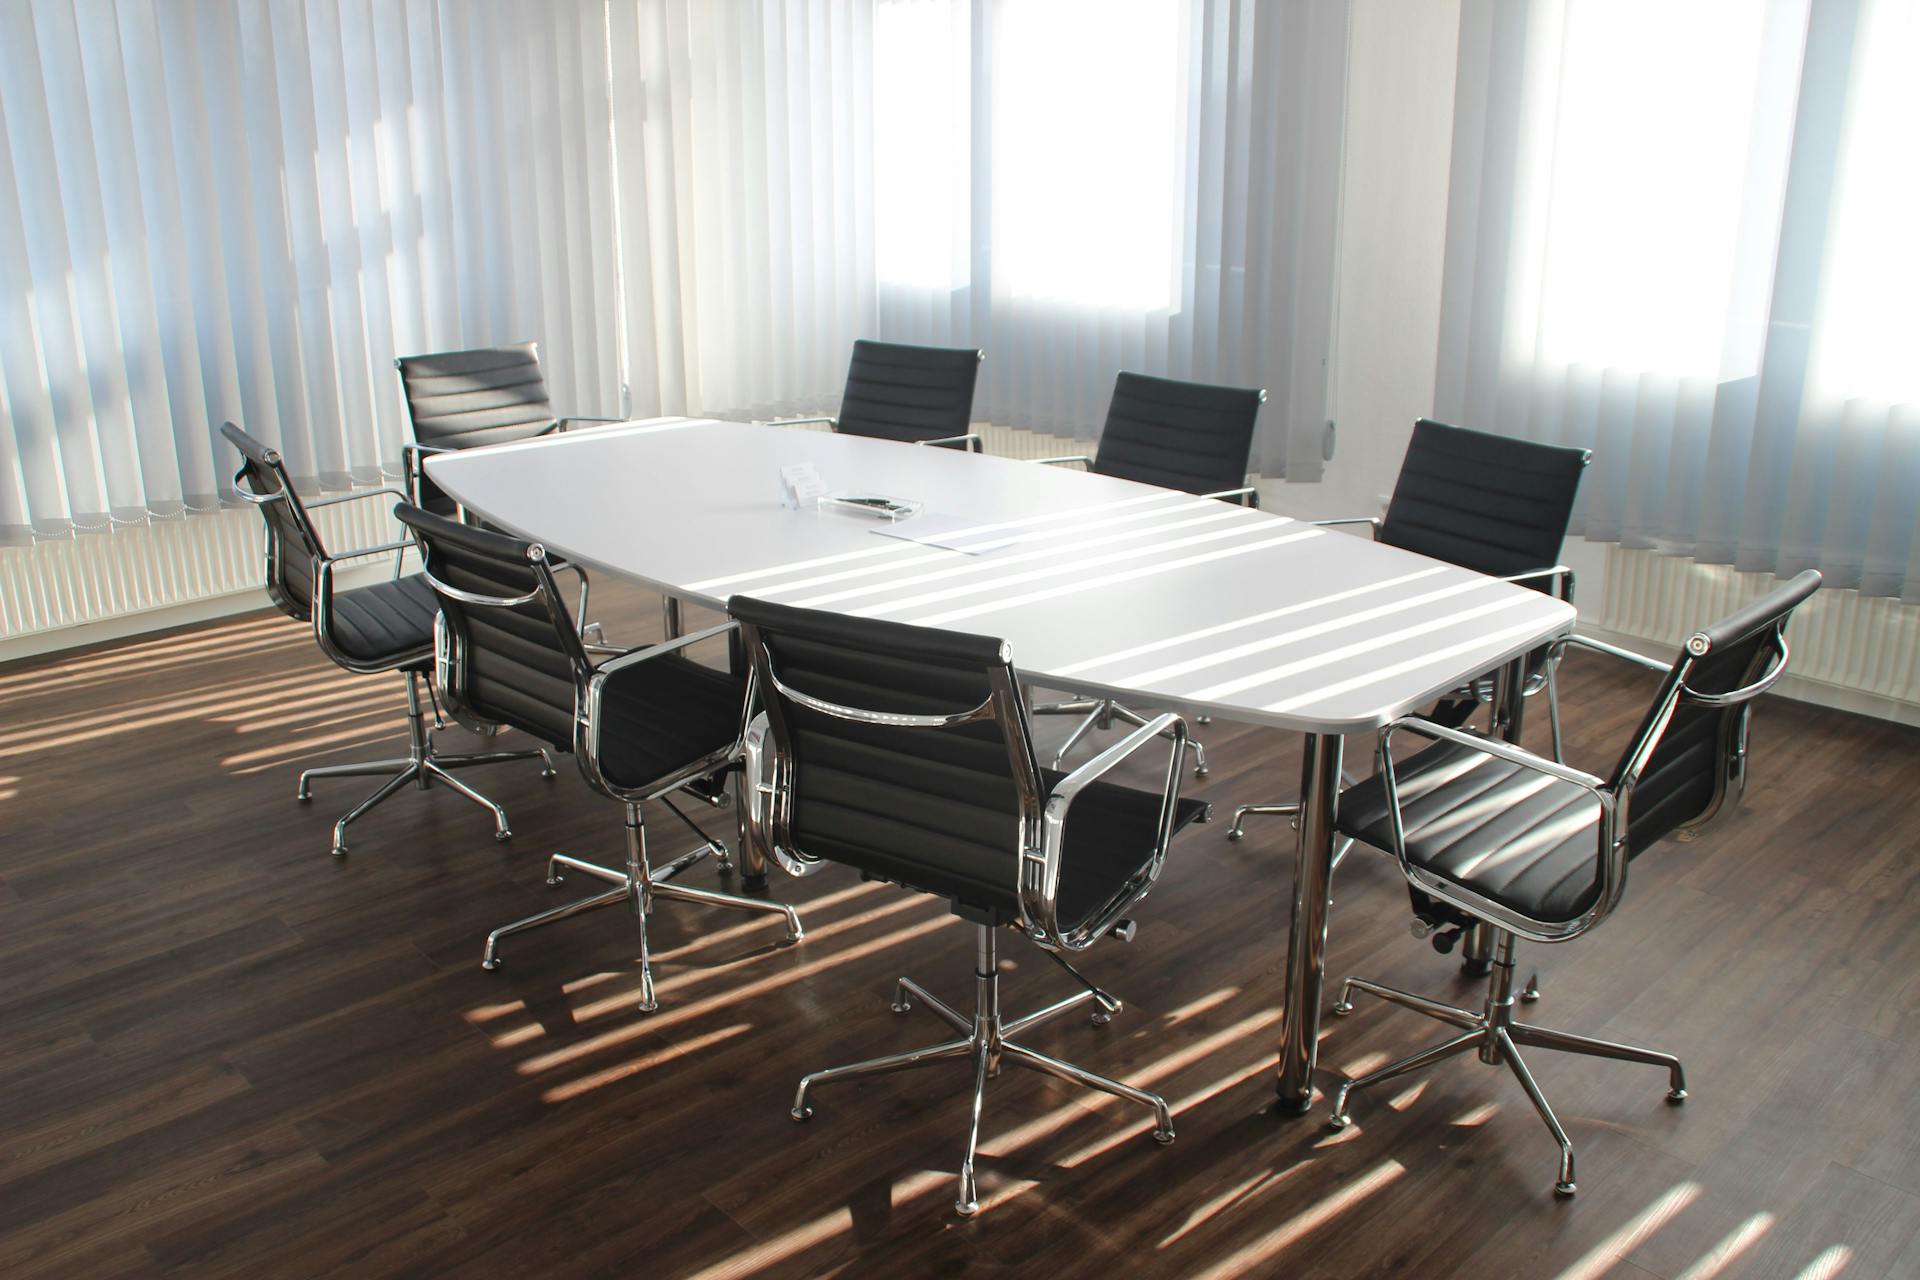 A meeting room in an office | Source: Pexels